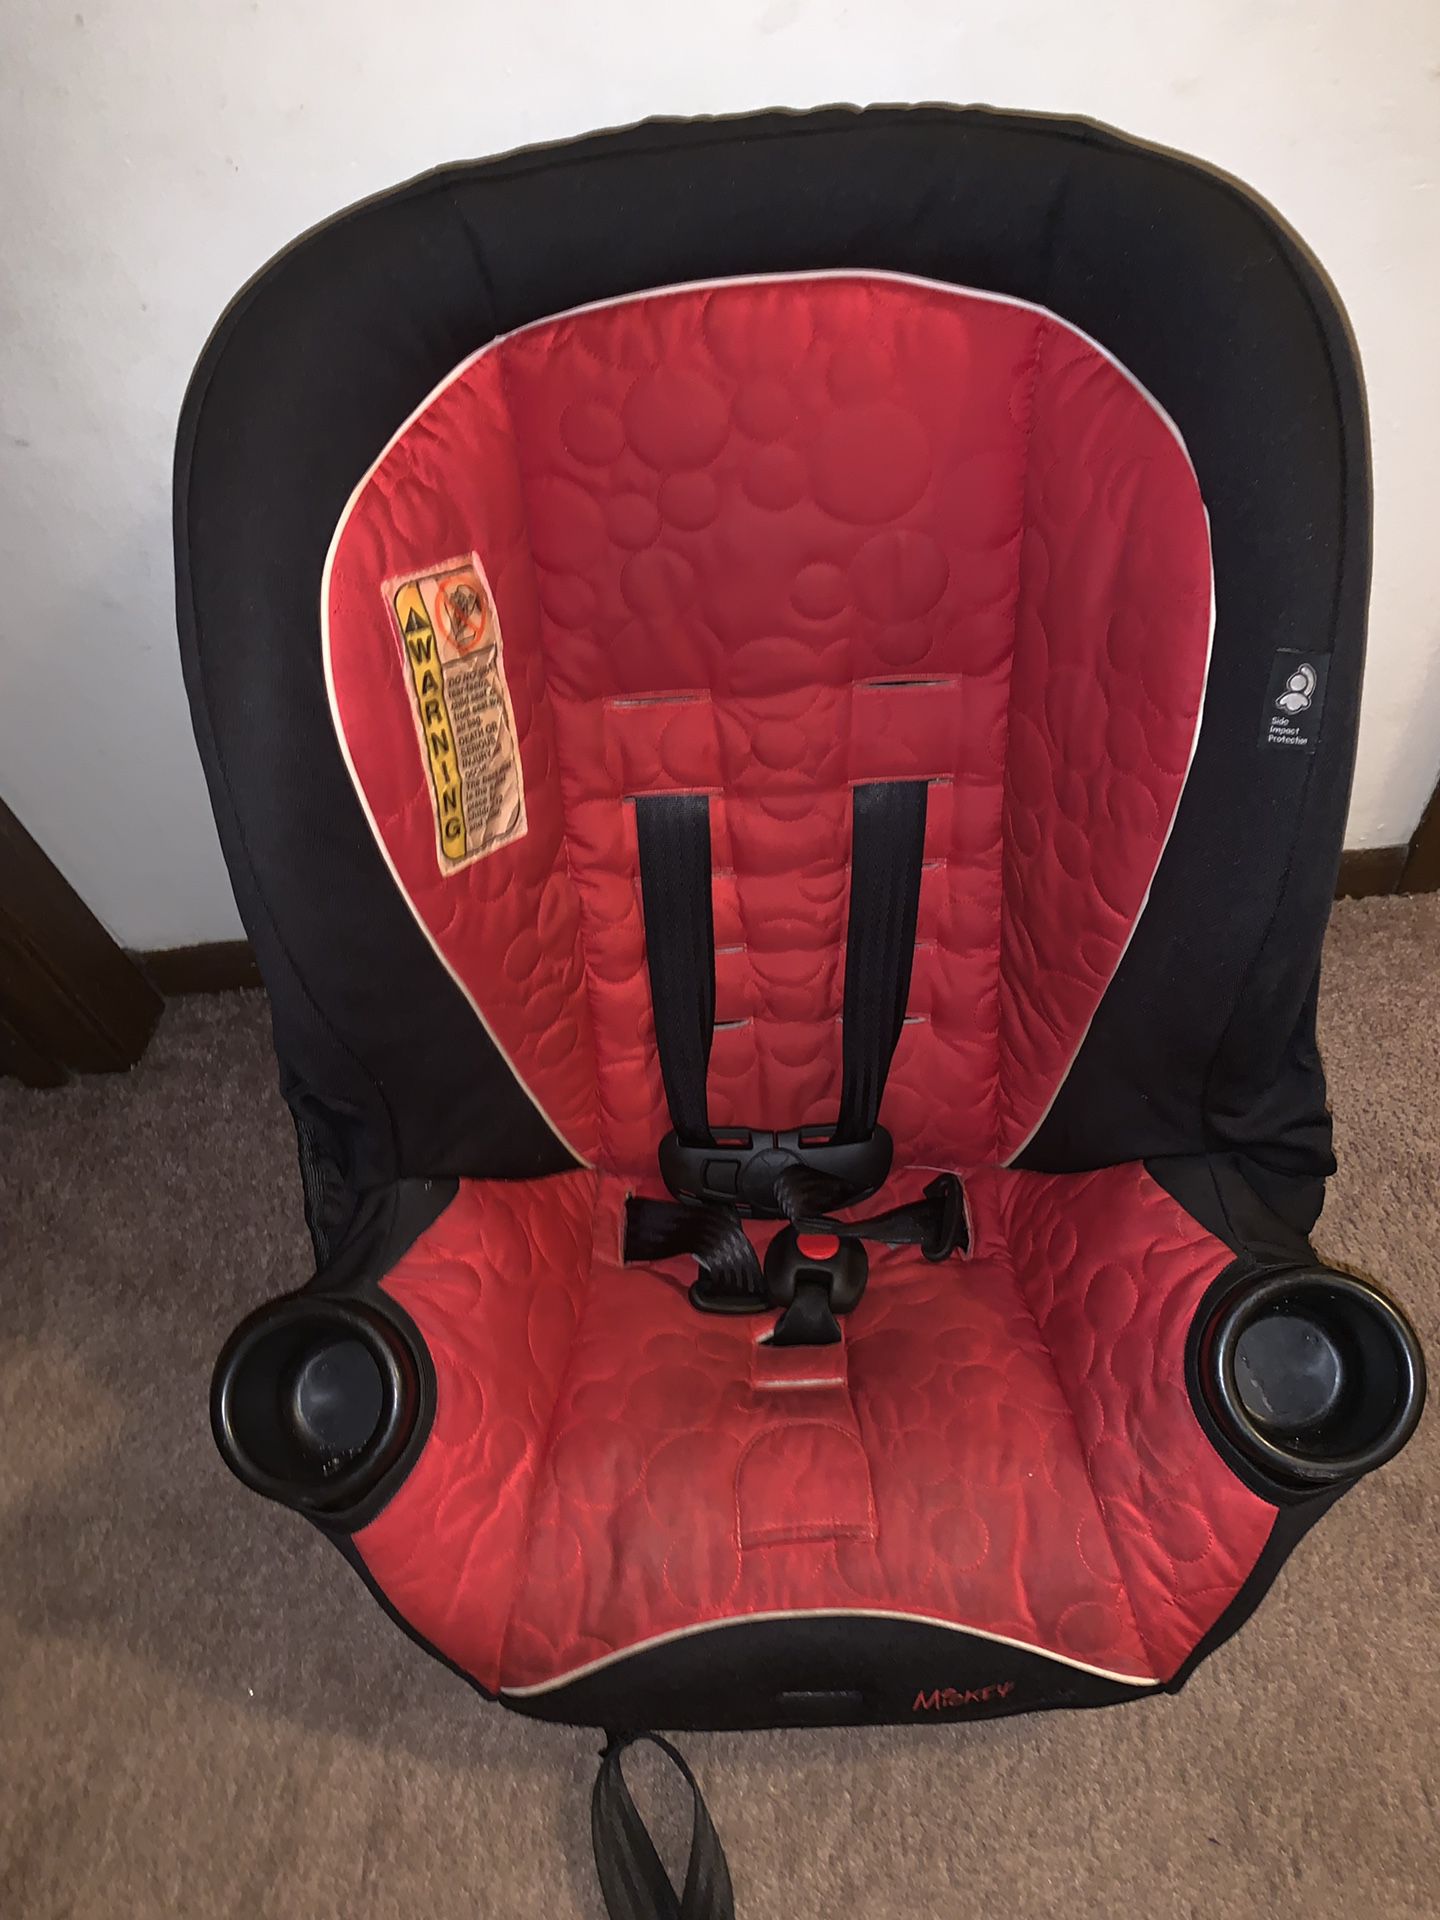 Boy car seat for sell $35.00 only pick up only